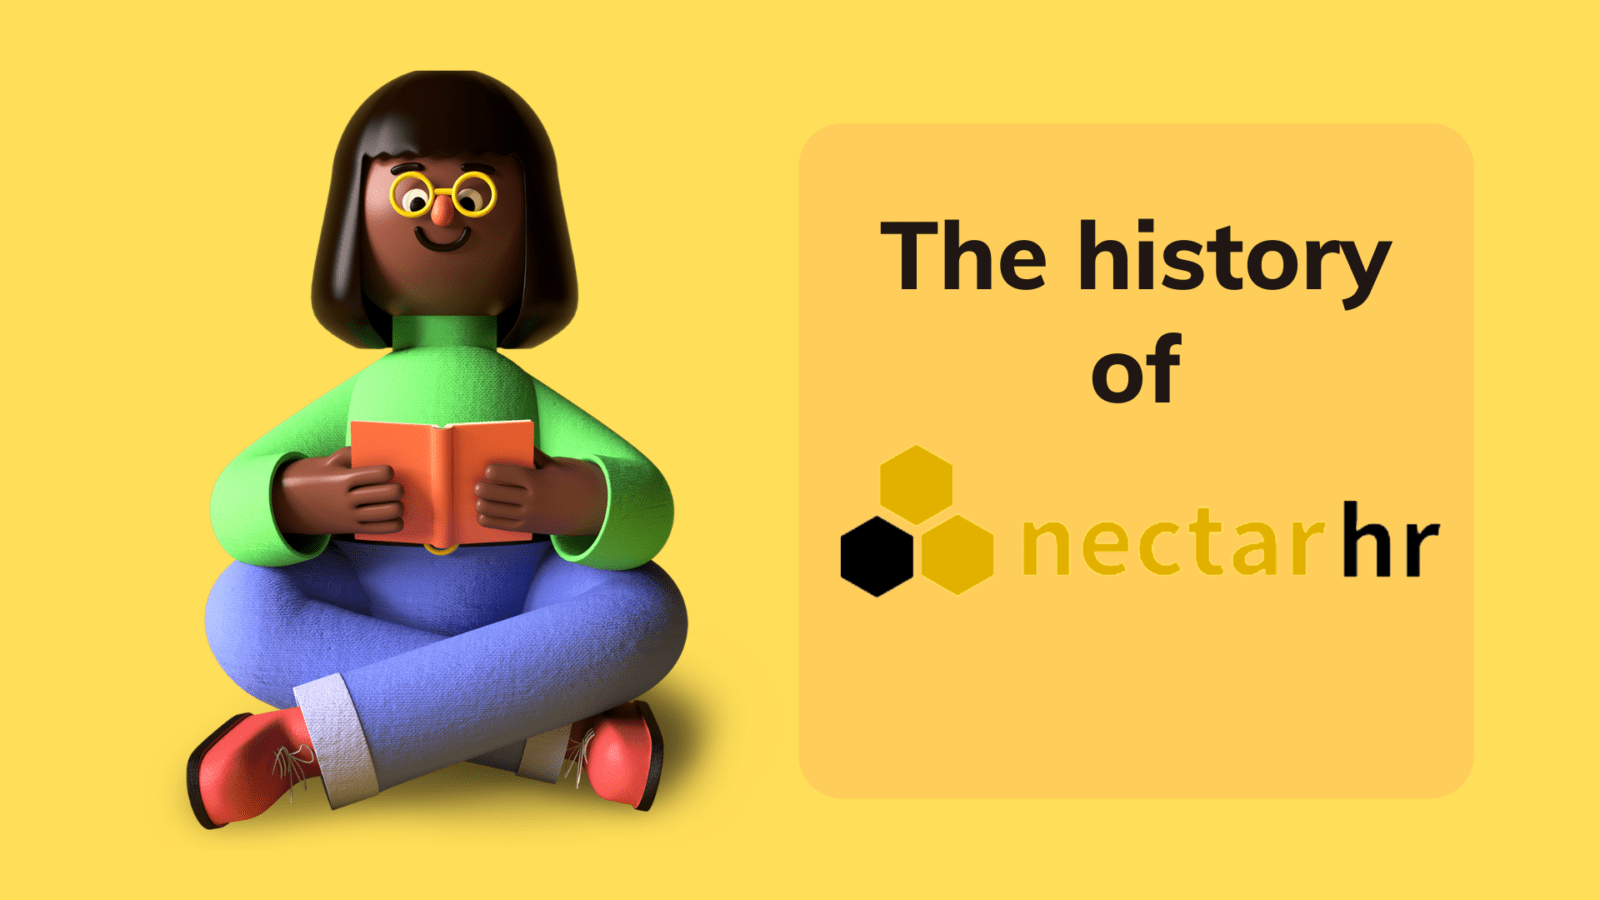 The History of Nectar HR